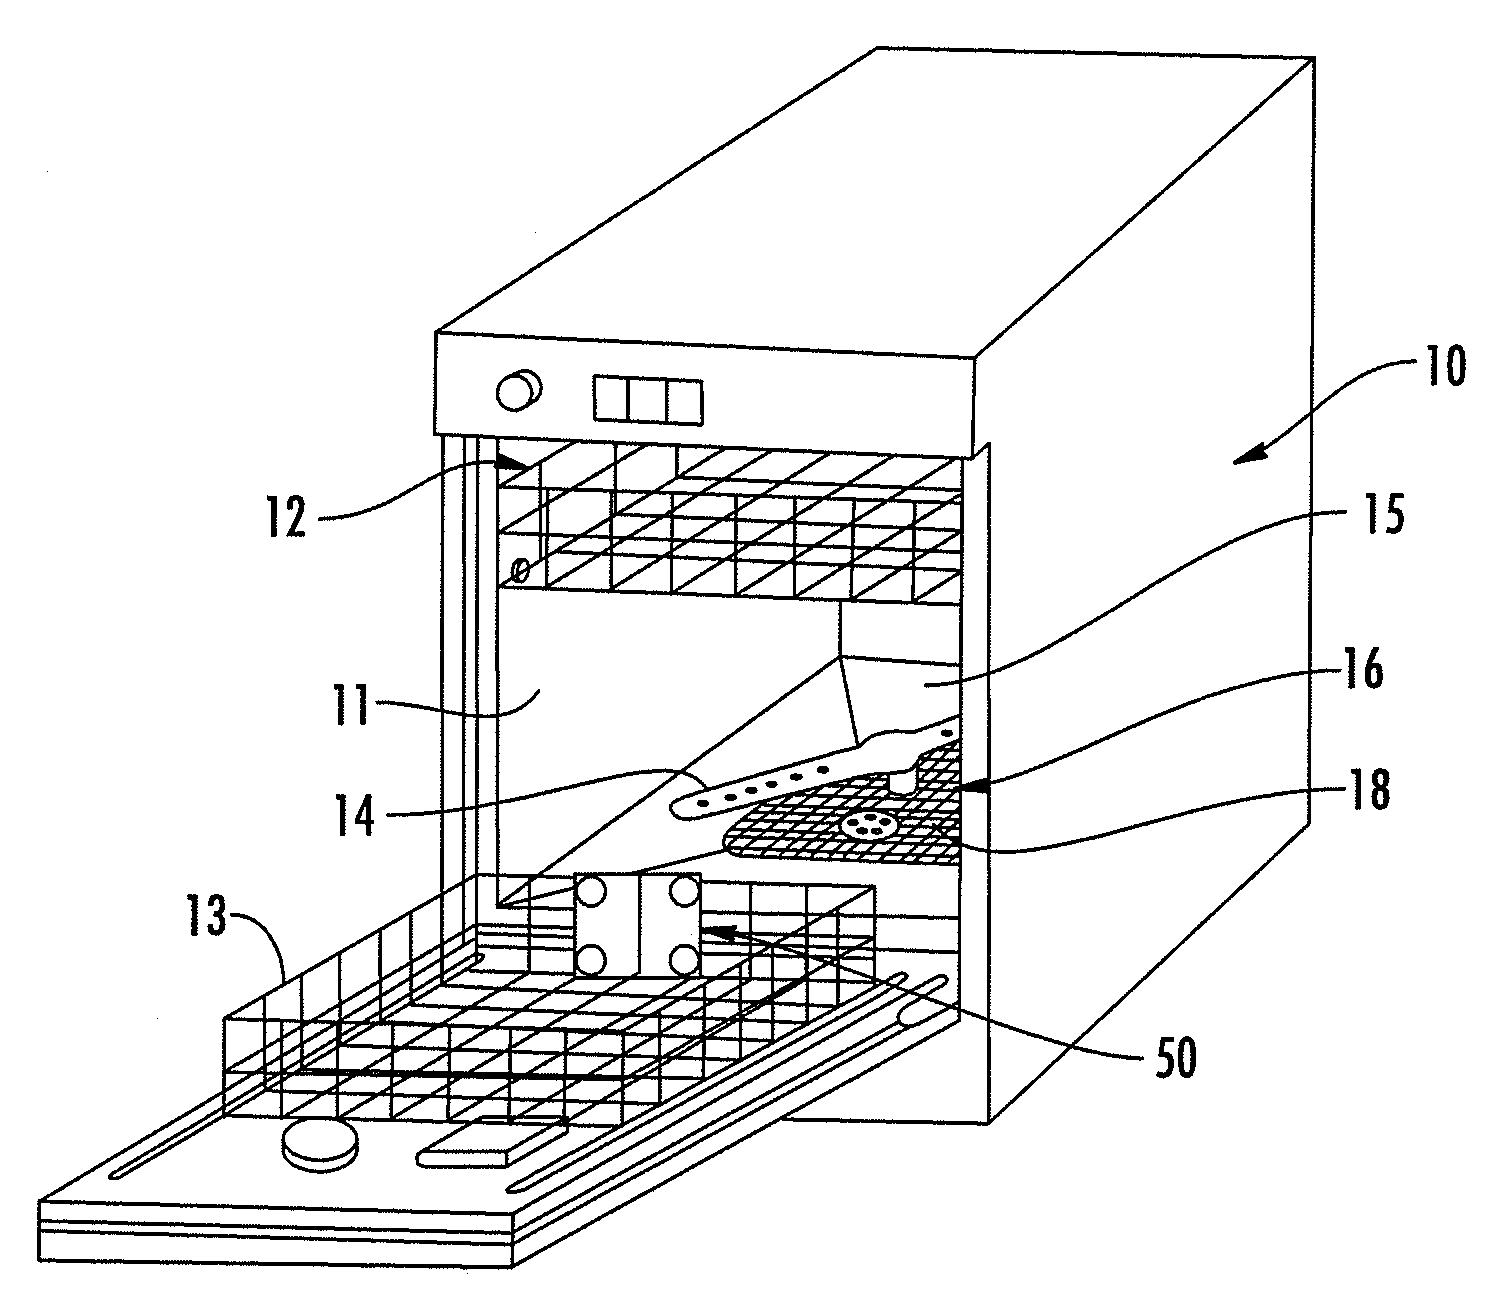 Fluid circulation arrangement for providing an intensified wash effect in a dishwasher and an associated method